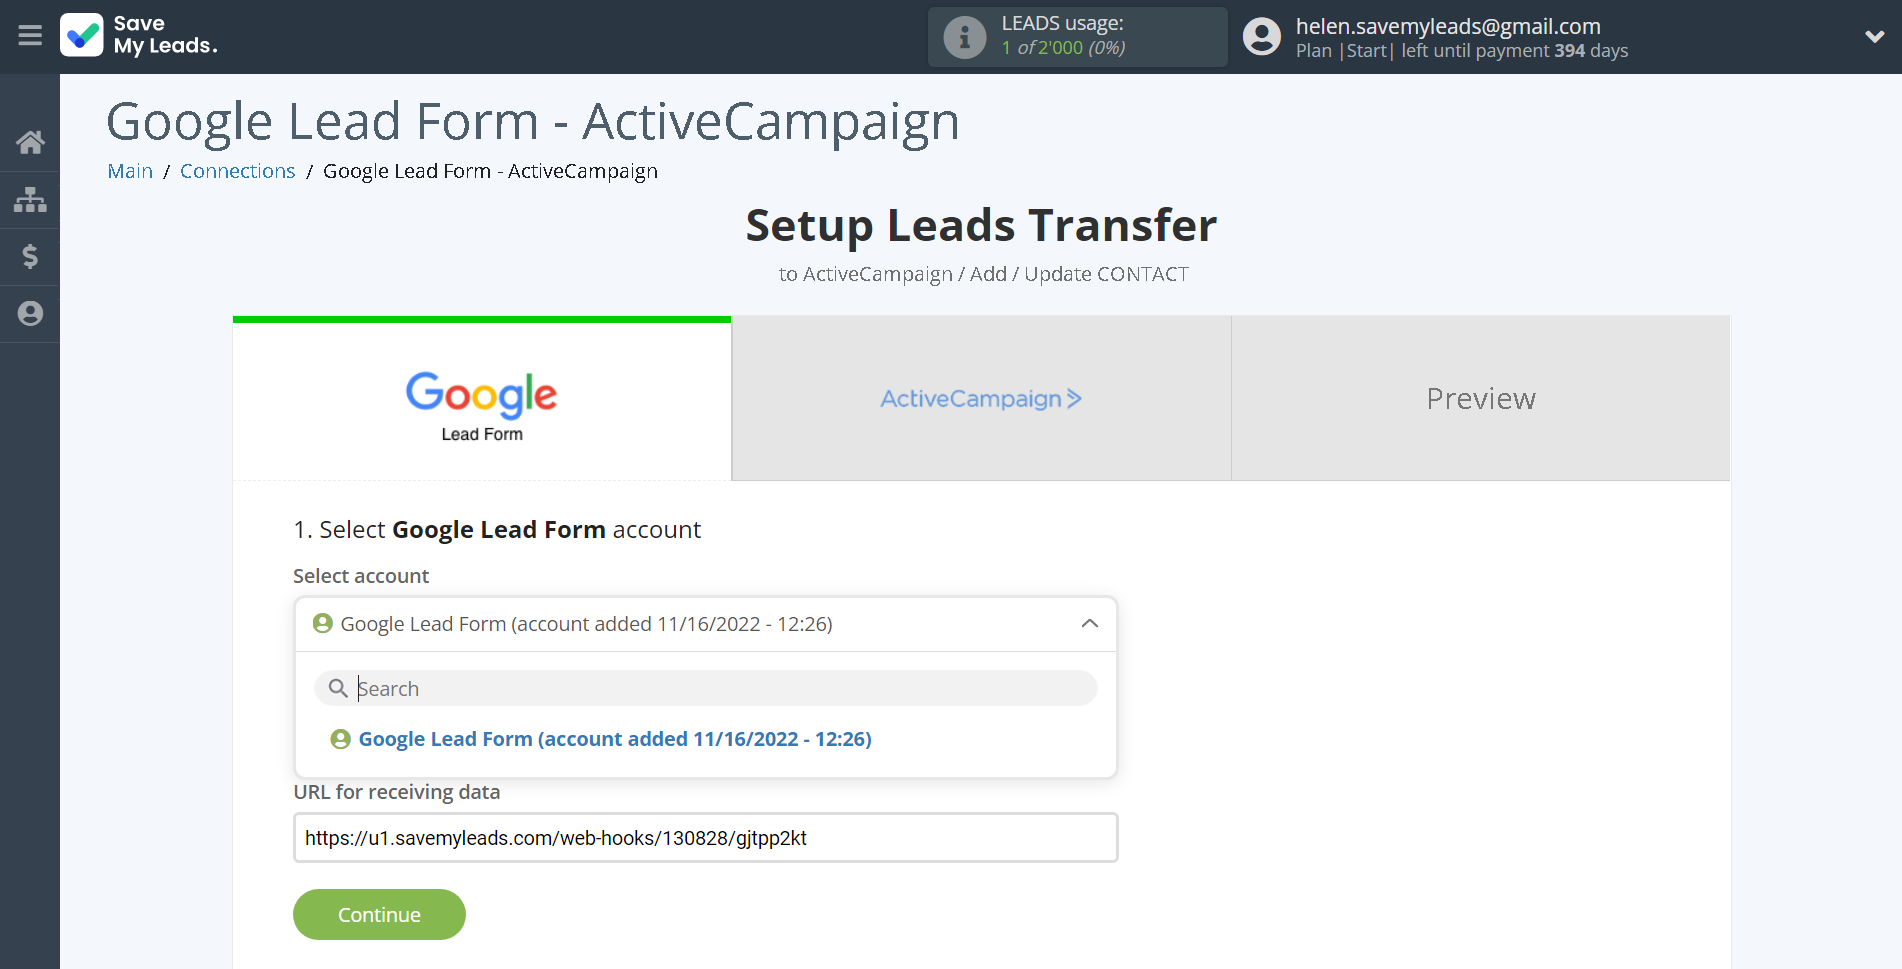 How to Connect Google Lead Form with ActiveCampaign Create Contacts | Data Source account selection